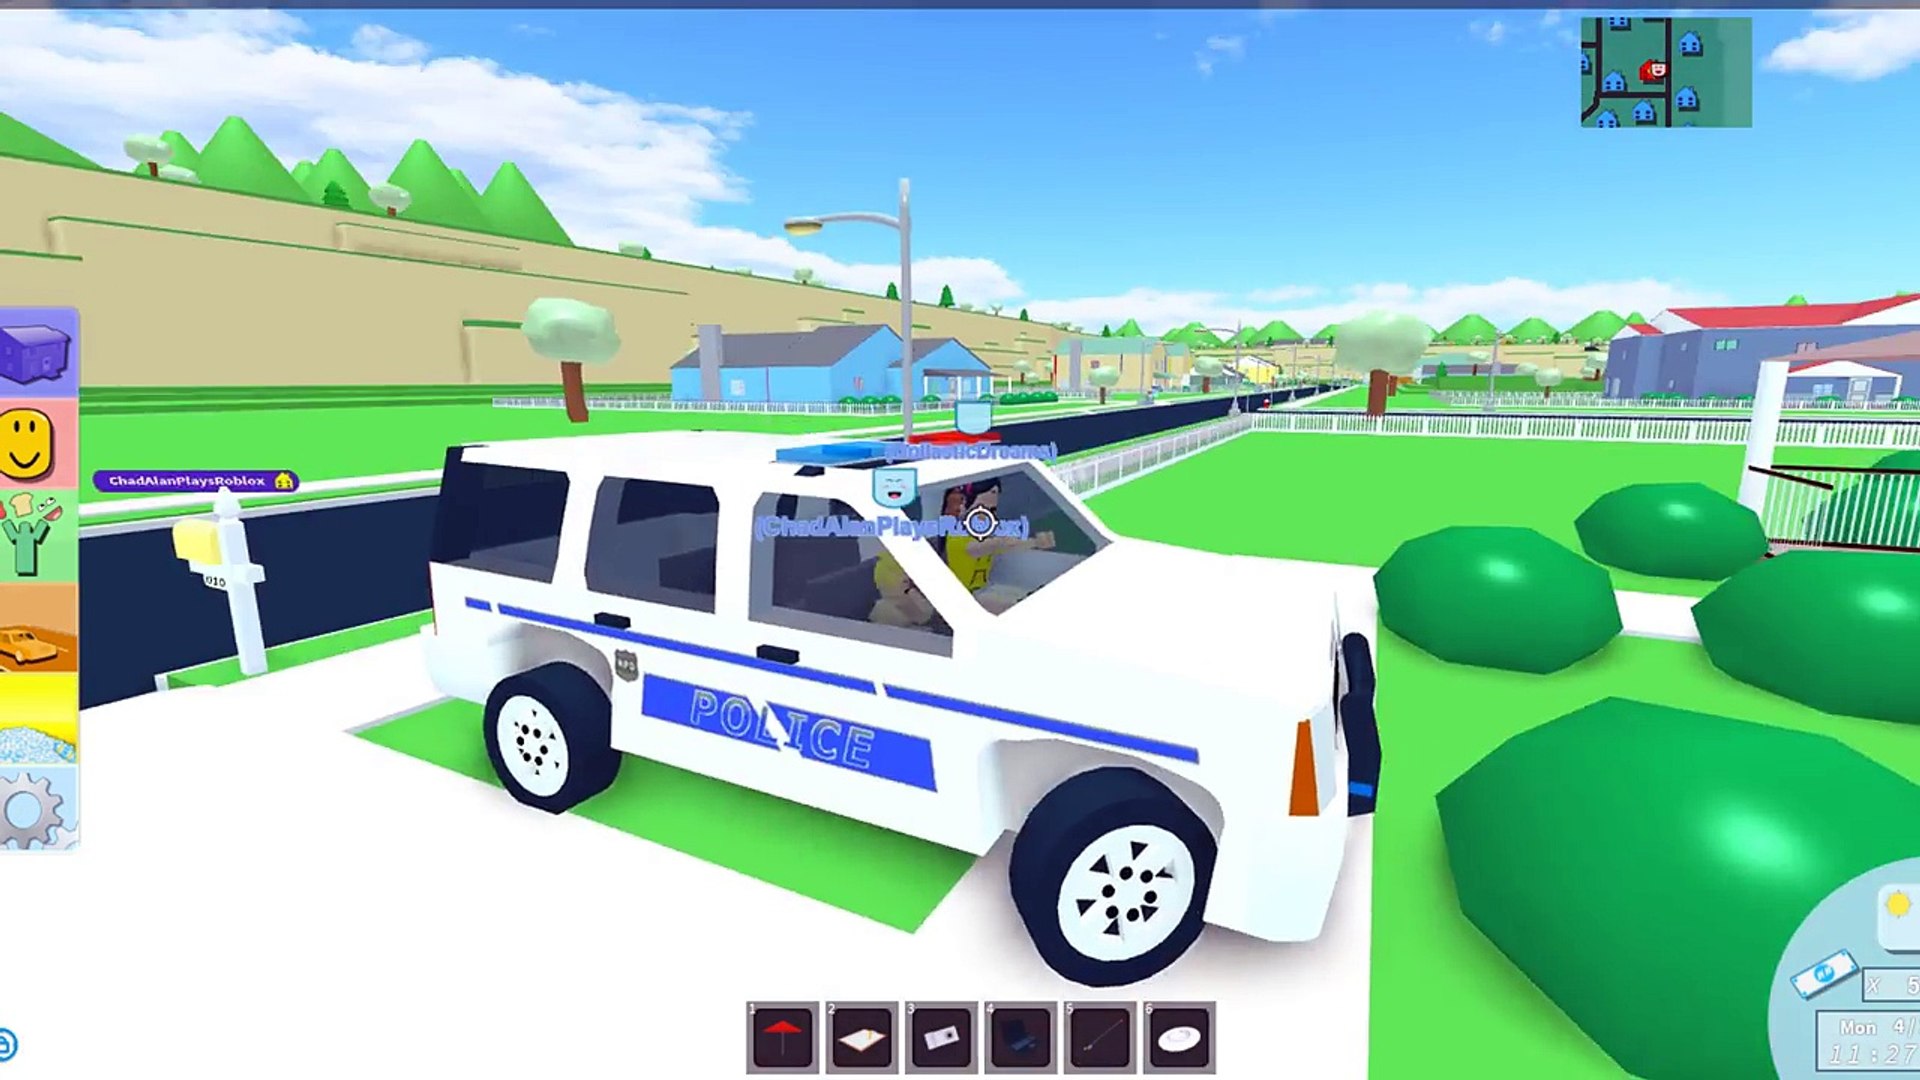 Bad Baby Steals Chocolate From The Store In Roblox Adventures Of Baby Alan Gamer Chad Plays Video Dailymotion - roblox prison life police car